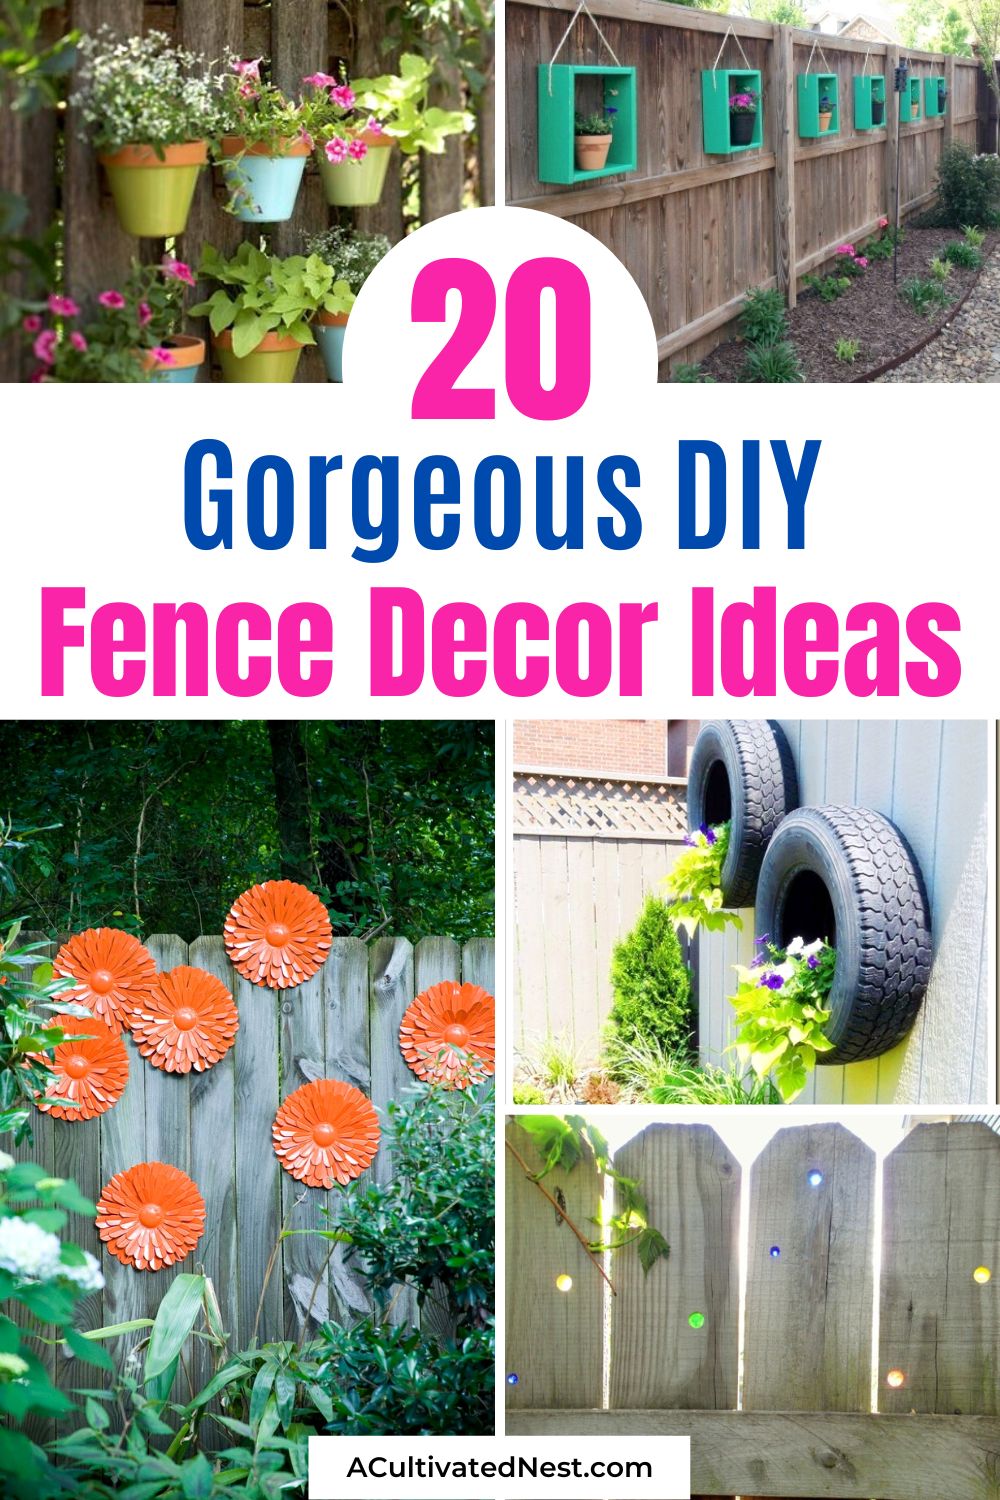 24 Gorgeous Backyard Fence Décor Ideas- For some fun and frugal ways to update your fence, check out these gorgeous DIY backyard fence décor ideas! | #diyProjects #fenceDecoration #backyardDecor #backyardDIY #ACultivatedNest